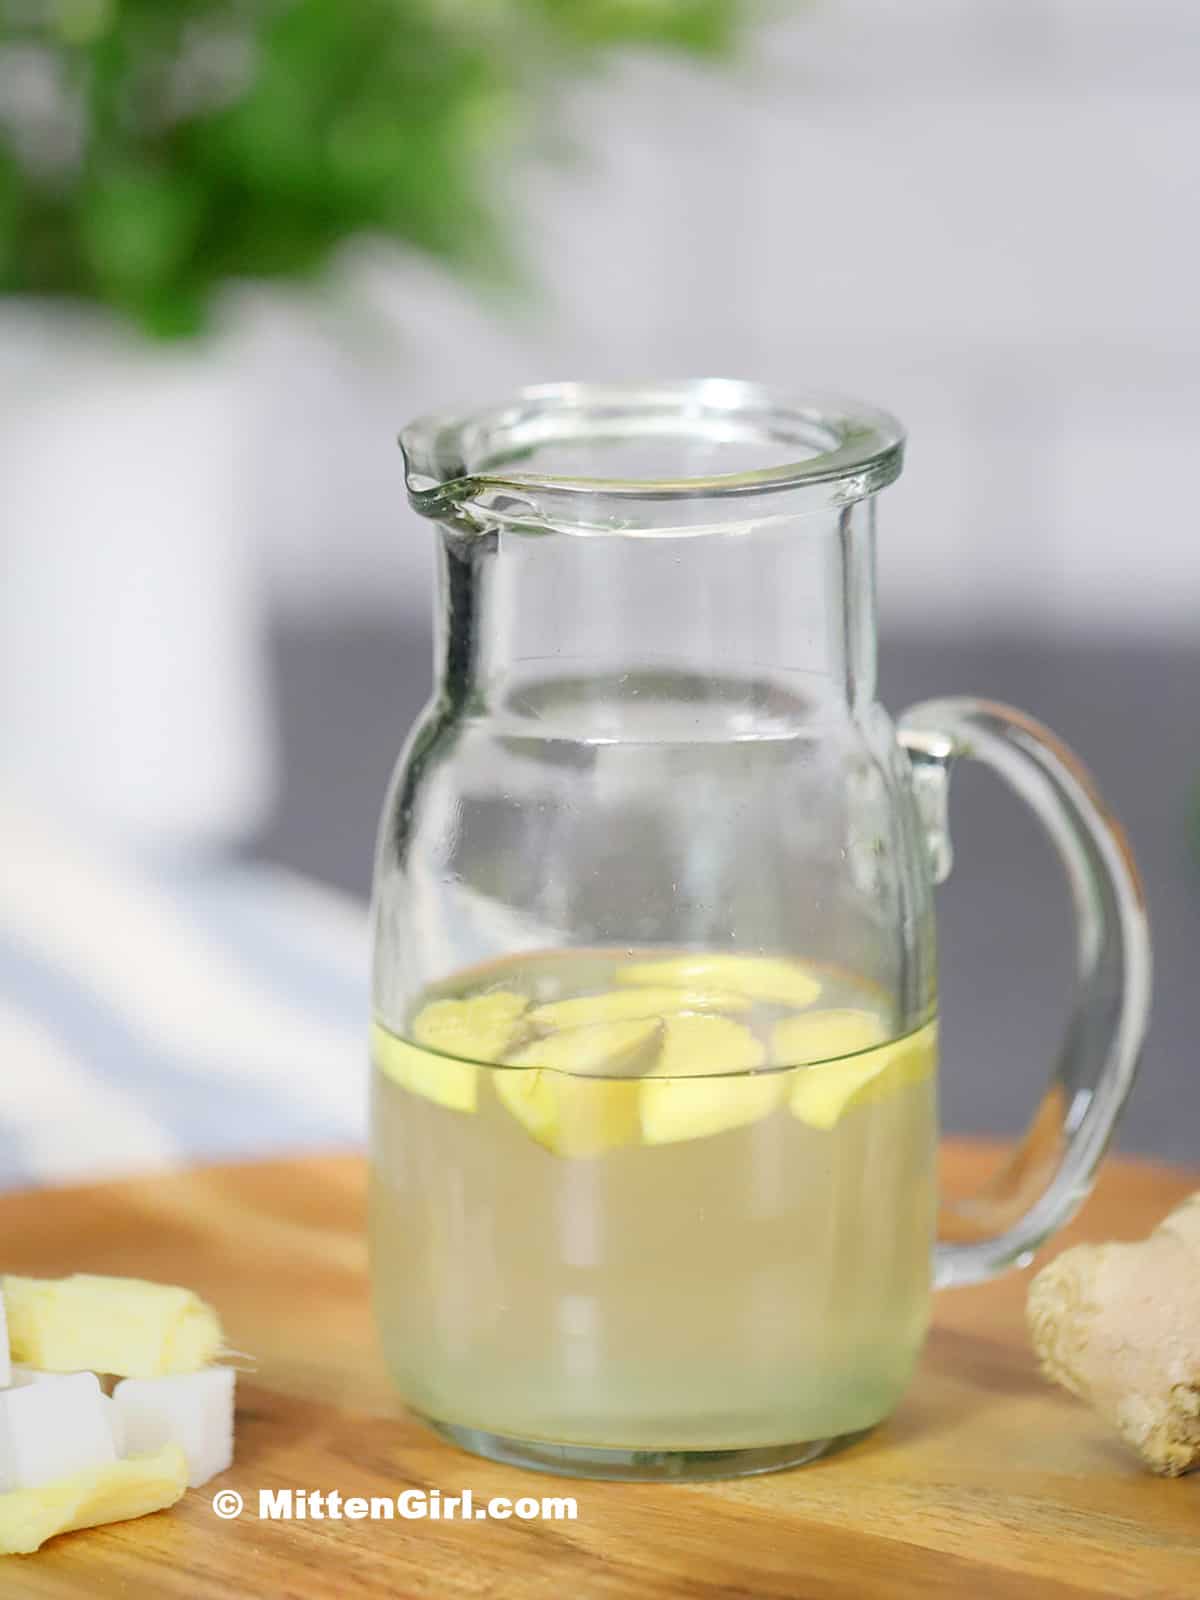 A small pitcher of ginger syrup.